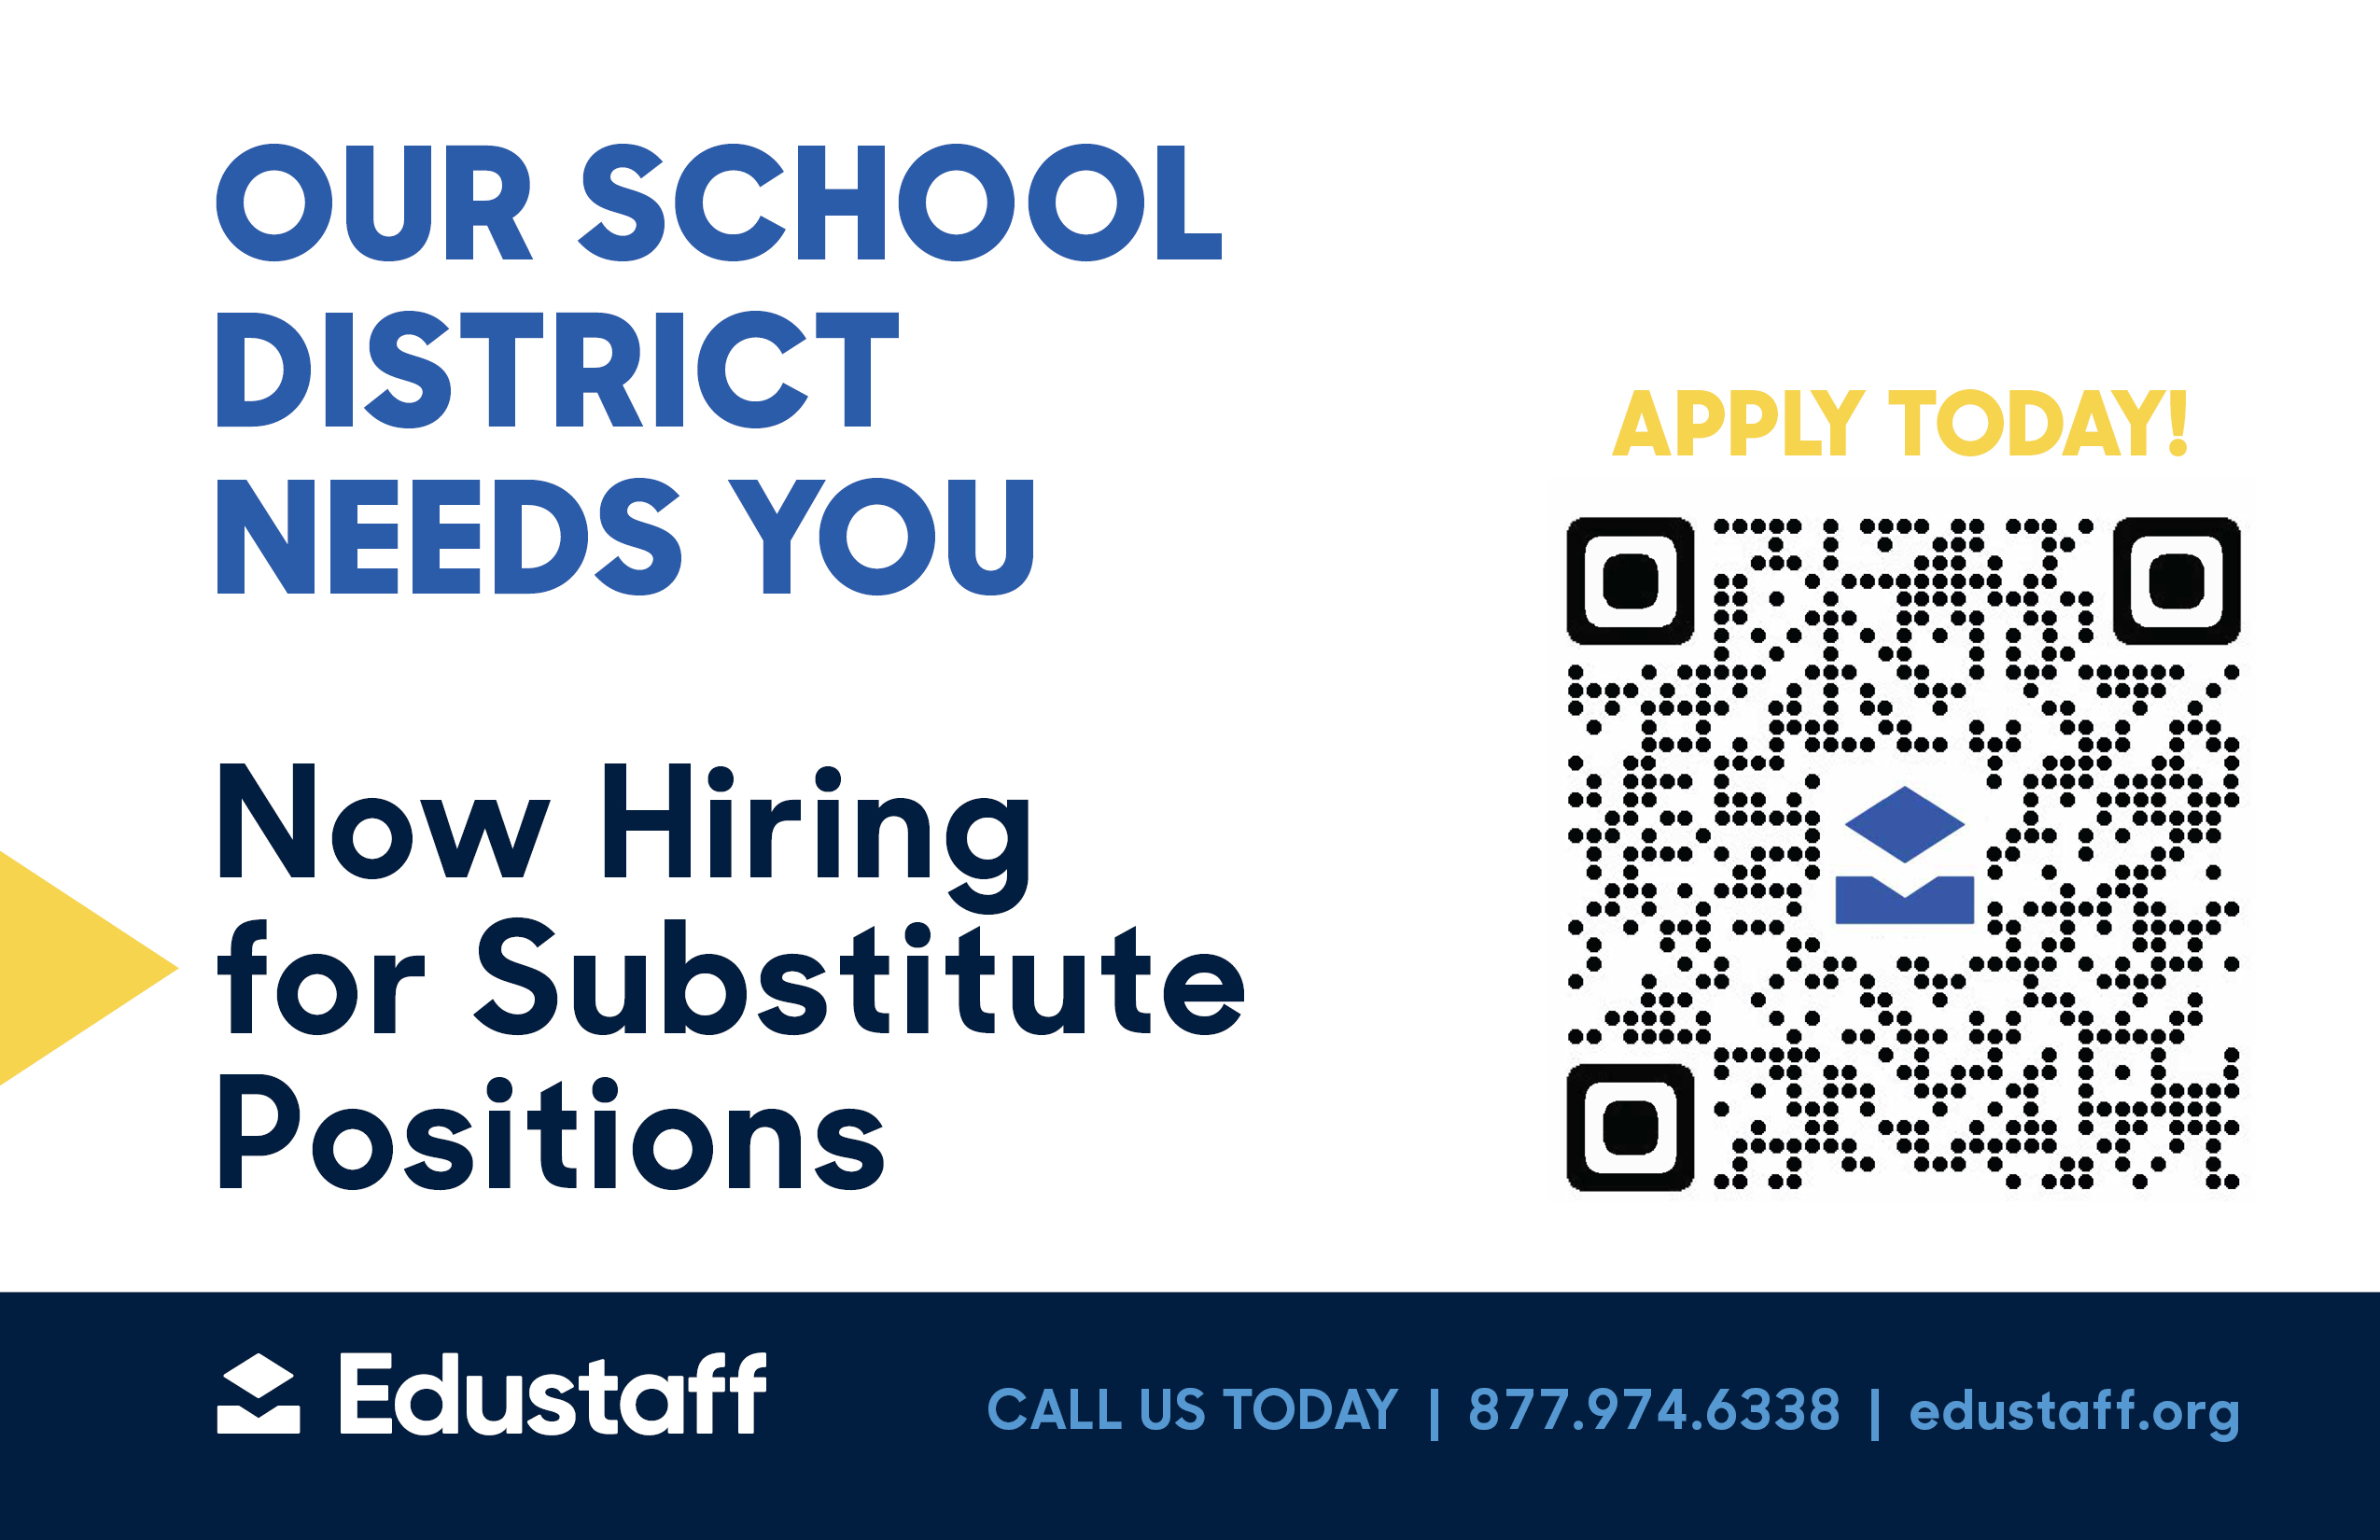 Our school district needs you. Now hiring for substitute positions.